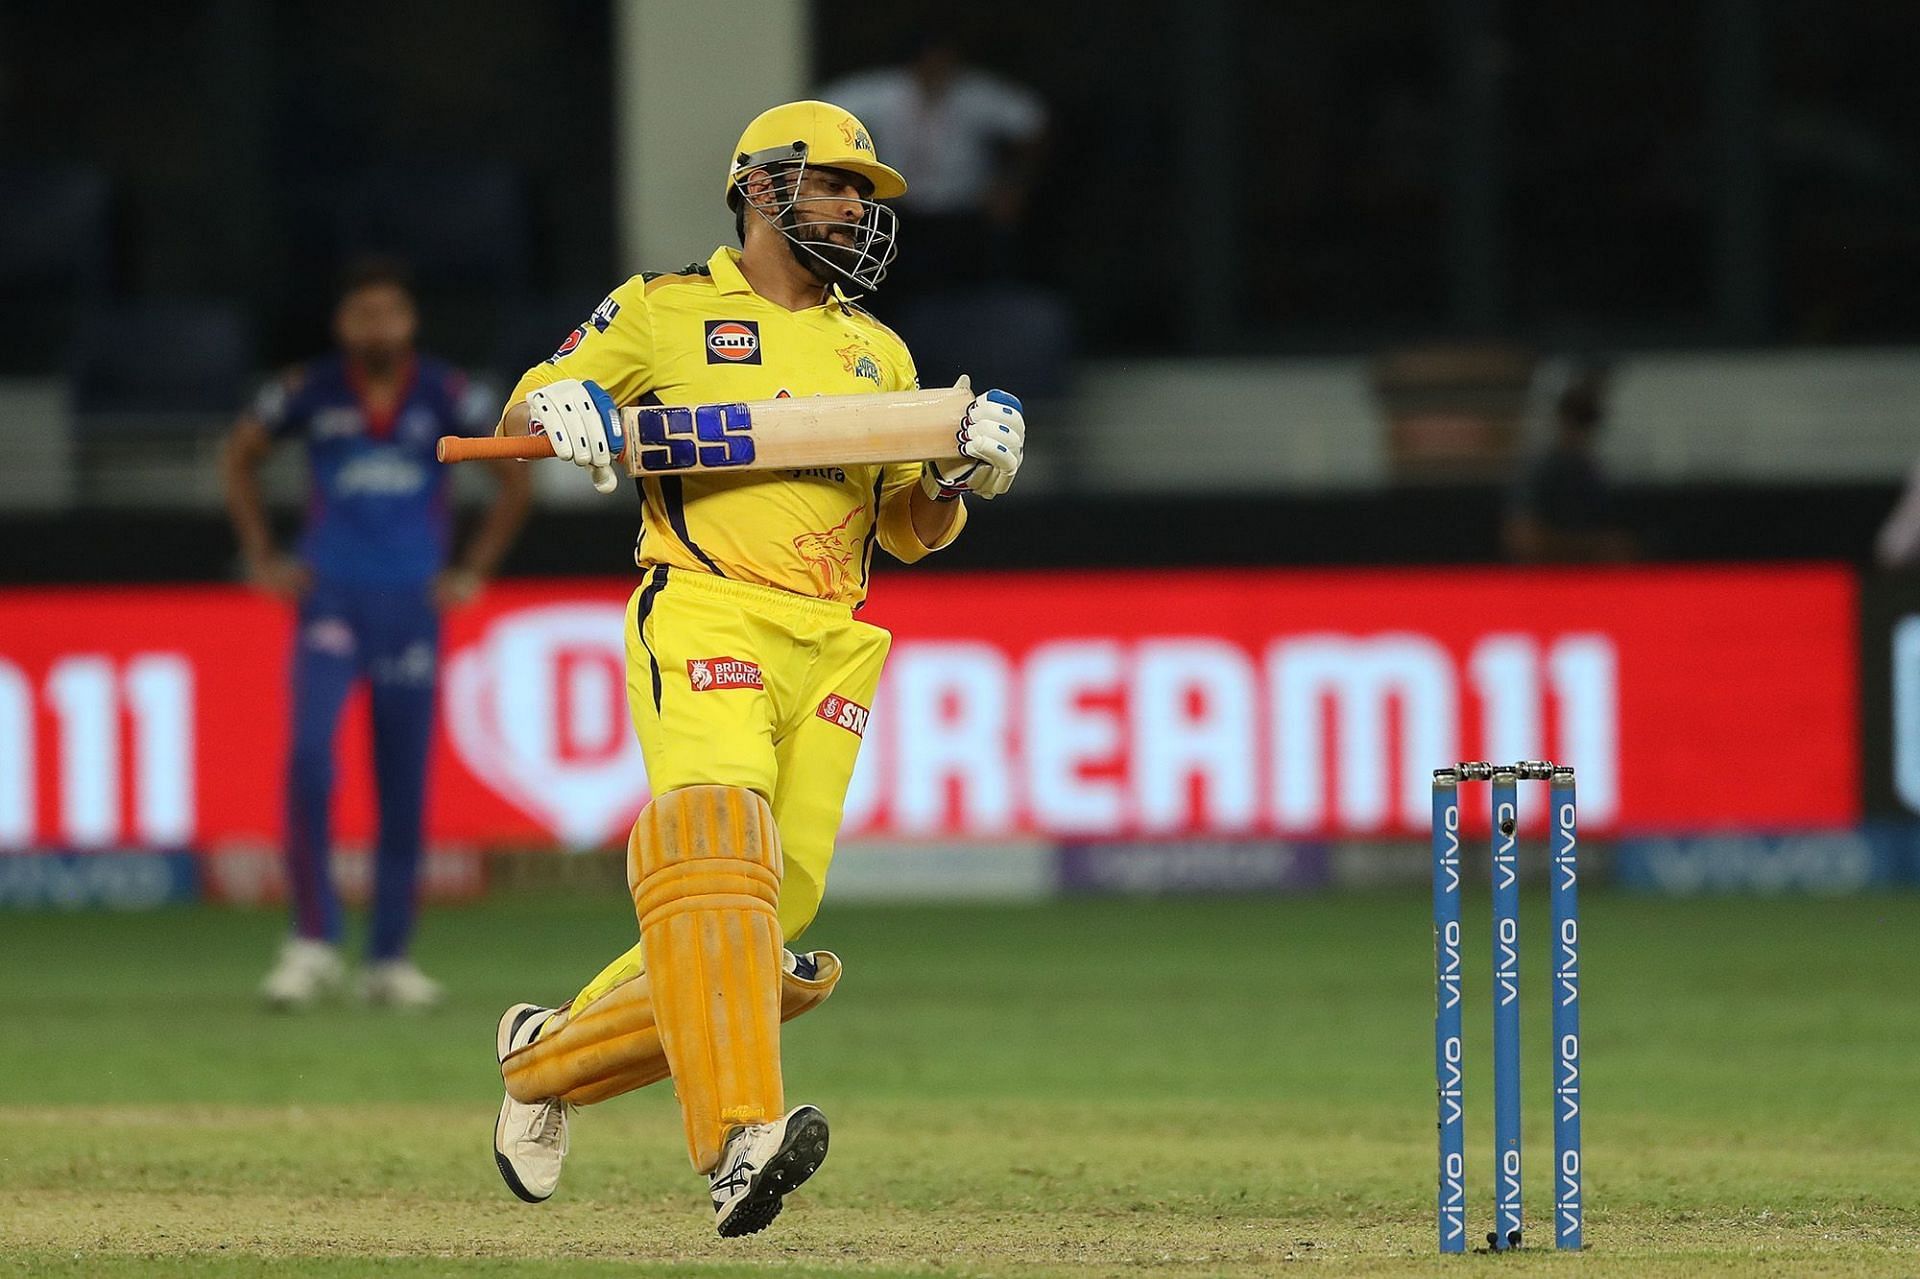 MS Dhoni ended the game off for CSK against DC in Qualifier 1. (Image Courtesy: IPLT20.com)